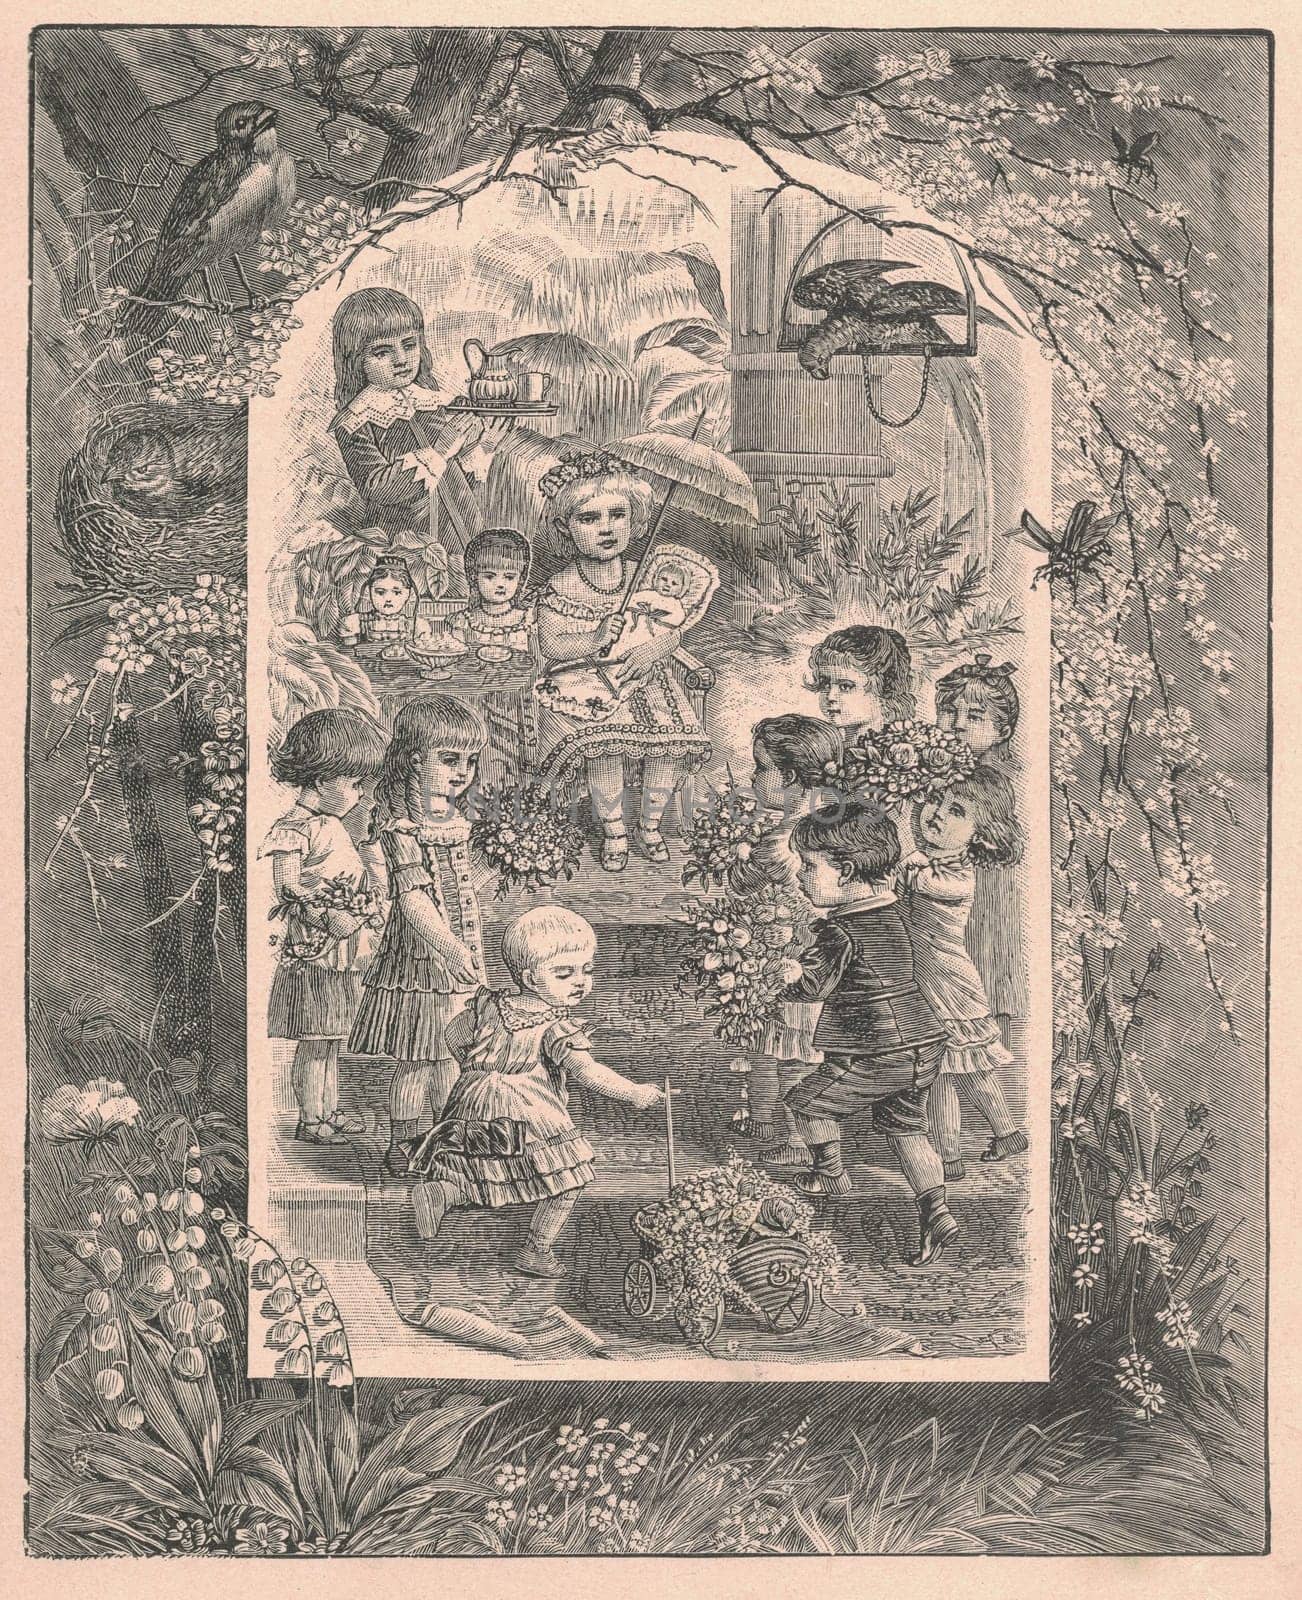 Black and white antique illustration shows children with flowers in the garden. Vintage drawing shows a group of children in the blooming garden. Old picture from fairy tale book. Storybook illustration published 1910. A fairy tale, fairytale, wonder tale, magic tale, fairy story or Marchen is an instance of folklore genre that takes the form of a short story. Such stories typically feature mythical entities such as dwarfs, dragons, elves, fairies and Peris, giants, Divs, gnomes, goblins, griffins, mermaids, talking animals, trolls, unicorns, or witches, and usually magic or enchantments.